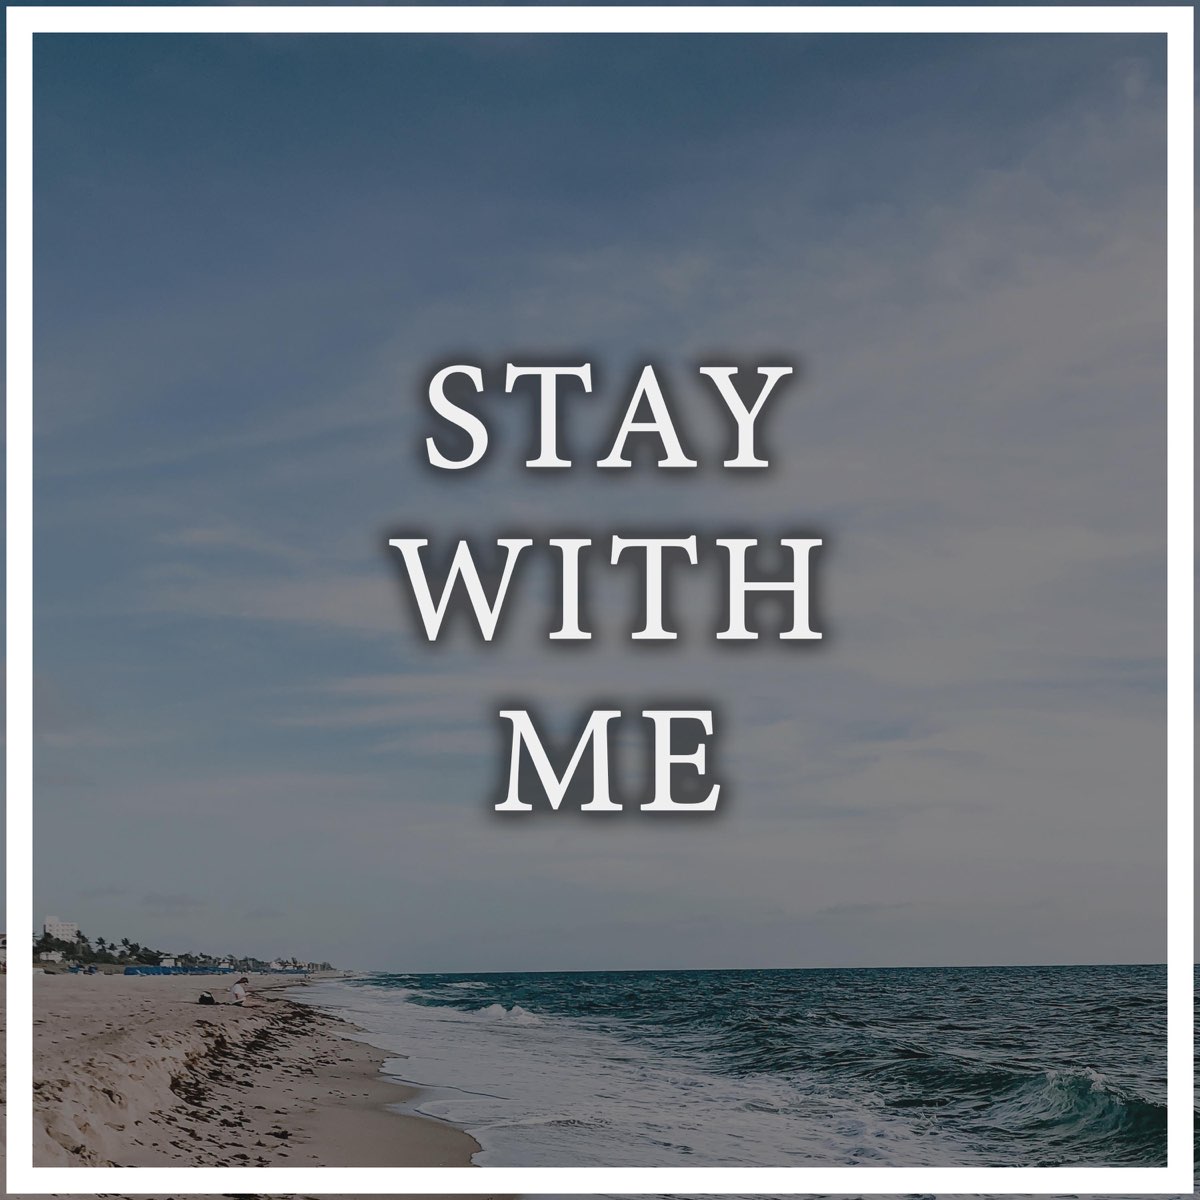 Stay with me say with me. Stay with me. Stay with me альбом. Stay with me надпись. Stay with me BL.